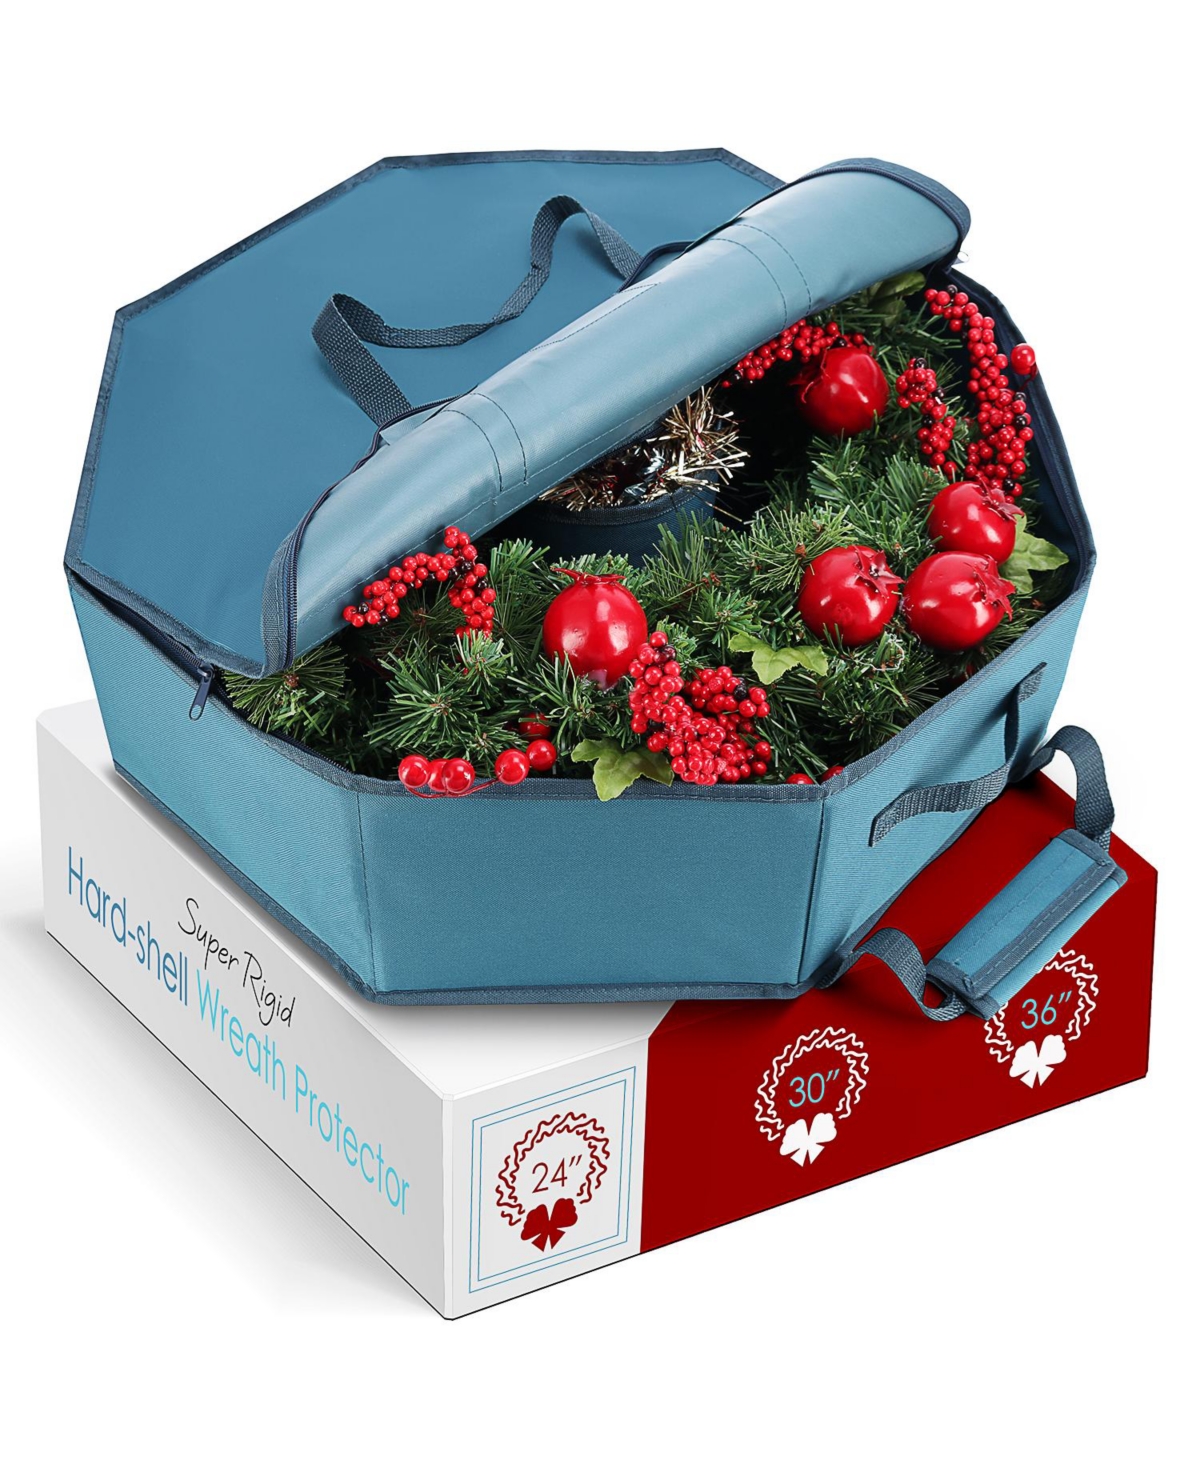 Premium Hard Shell Wreath Storage Bag with Interior Pockets, Dual Zipper and Handles - 24 Inch - Blue